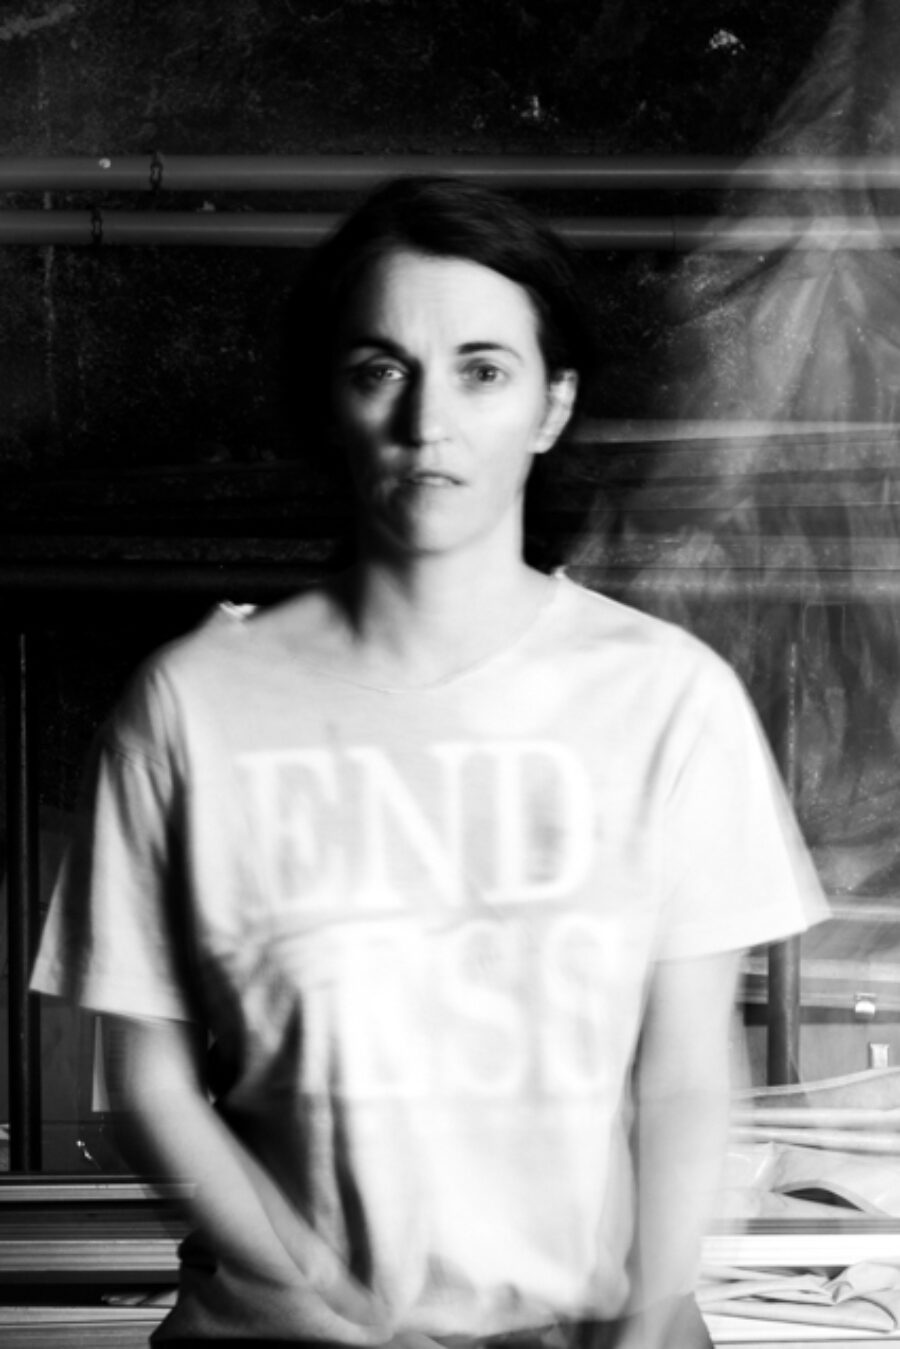 Black and white photo of Estelle Chaigne using what looks like analog film. Her arms are blurry from moving while the picture was taken. She is wearing a light coloured t-shirt.